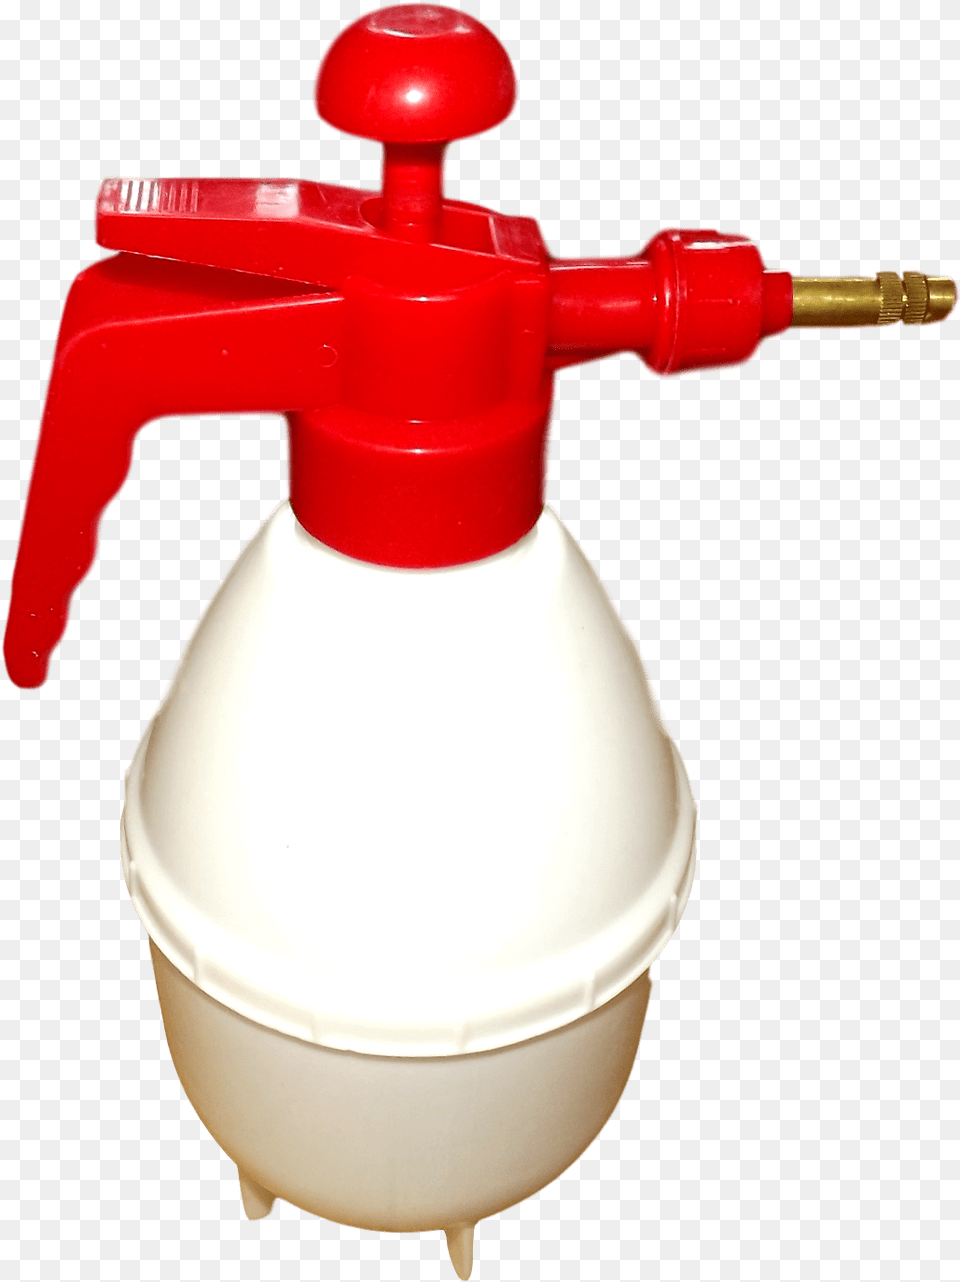 Water Spray Water Spray Bottle With Pump Robot Tool, Sink, Sink Faucet Free Png